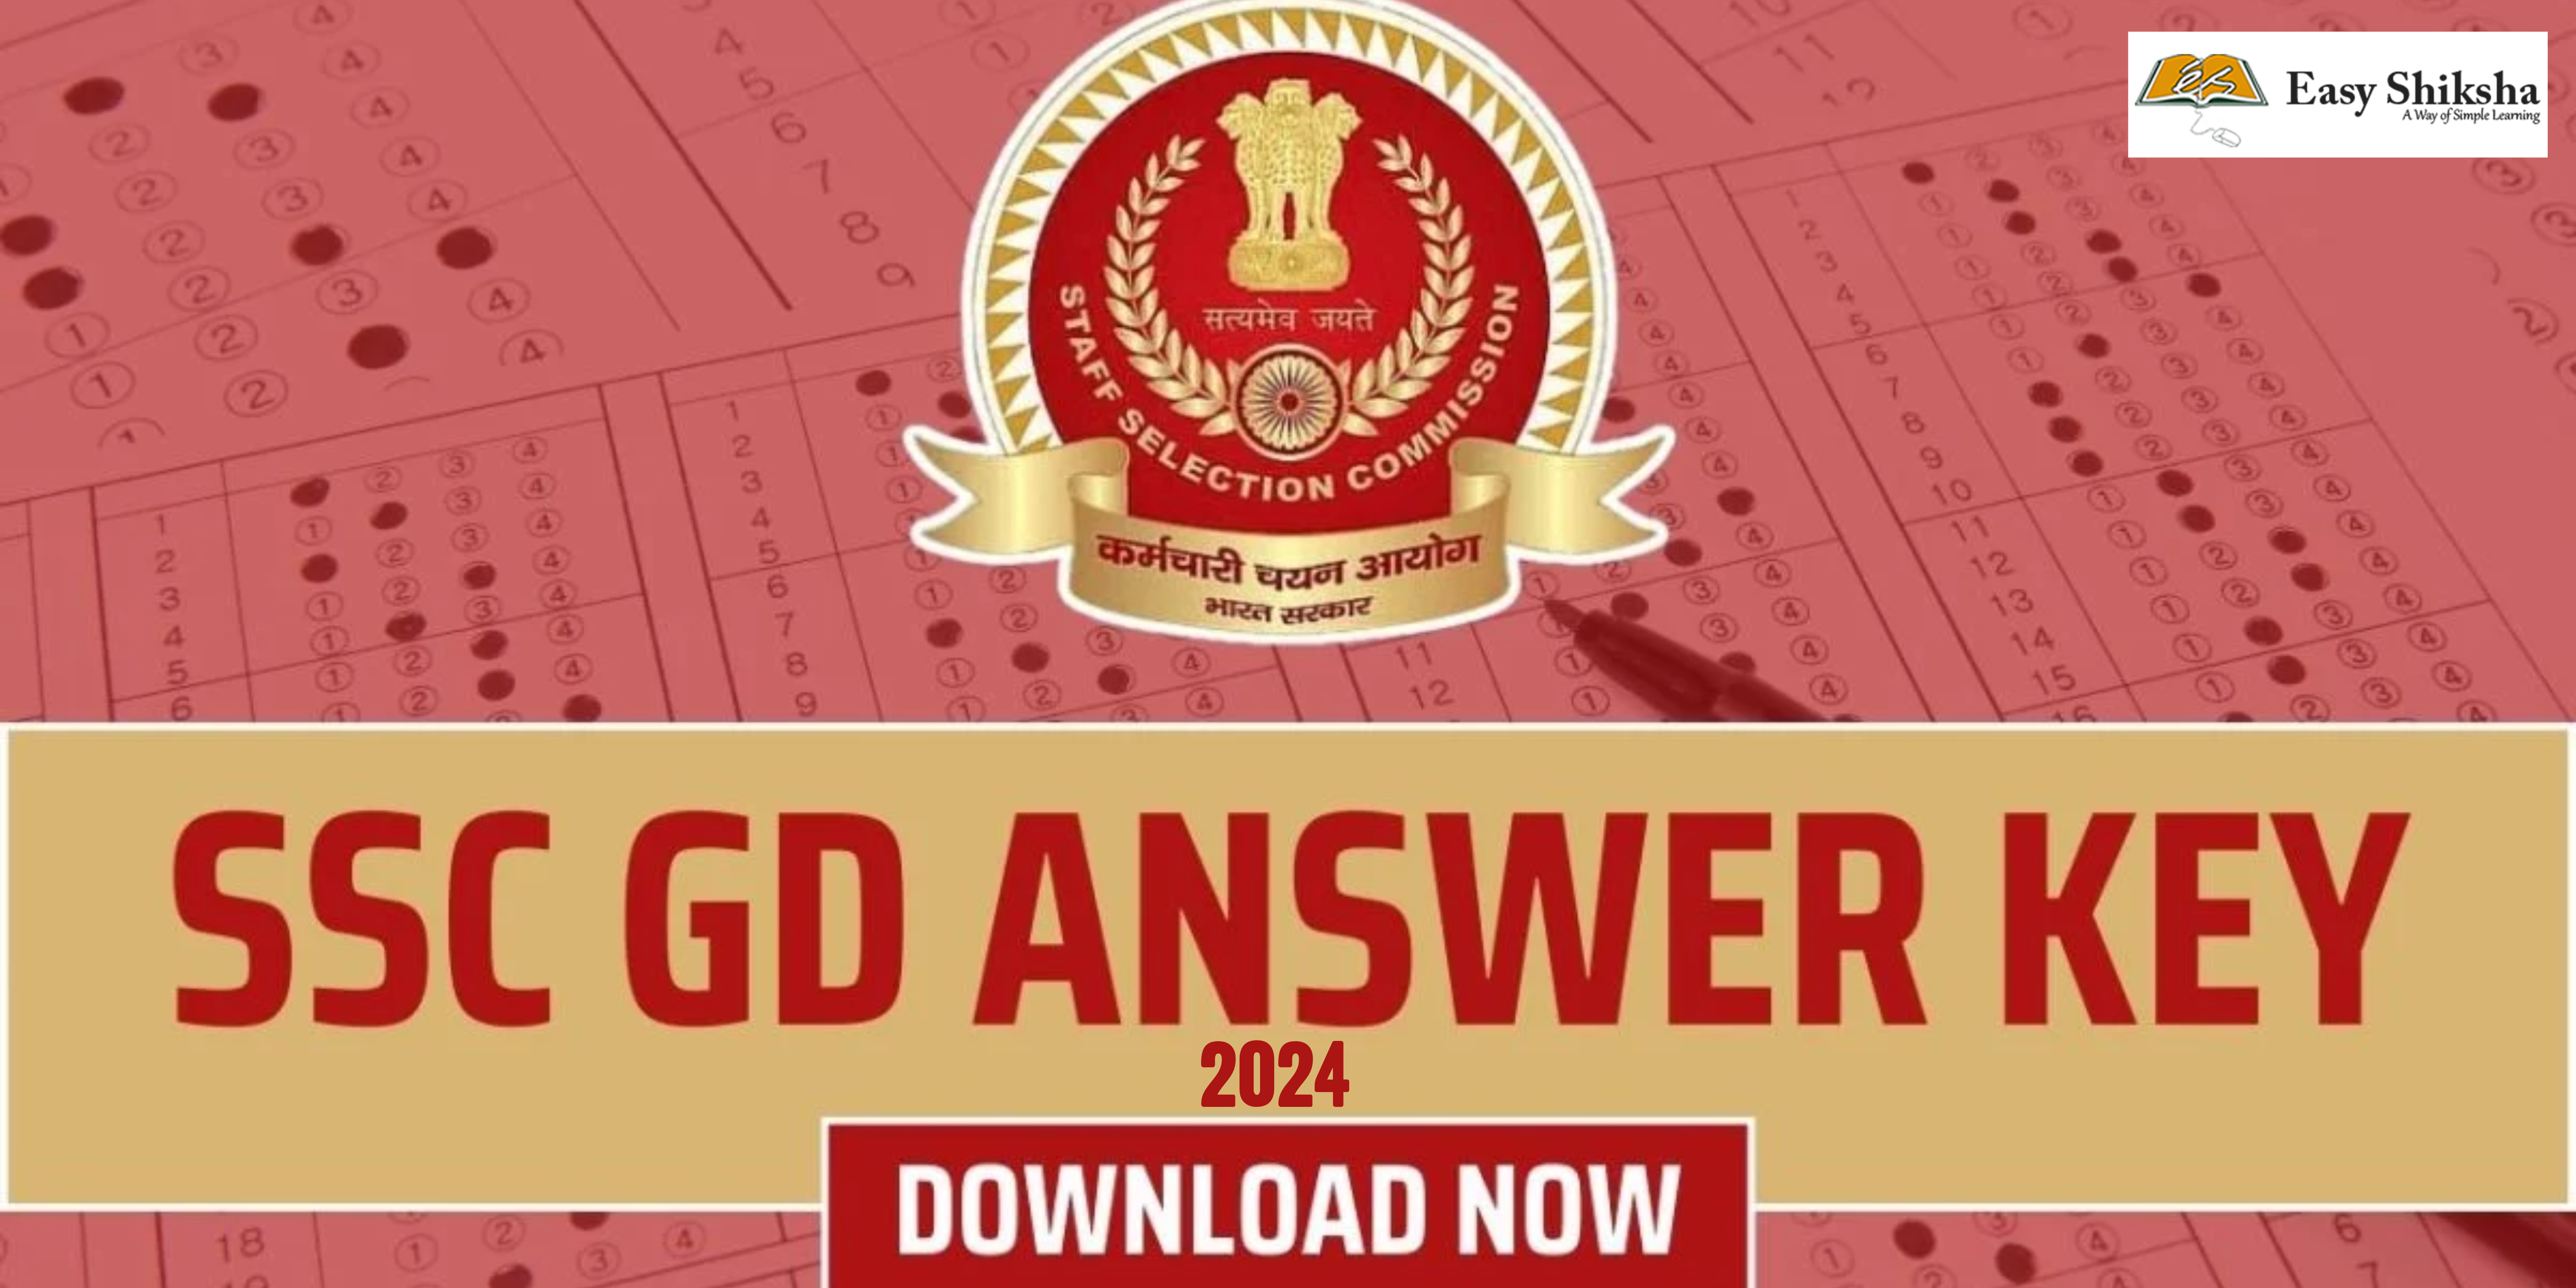 Access Link Here: SSC GD Constable 2024 Answer Key Released